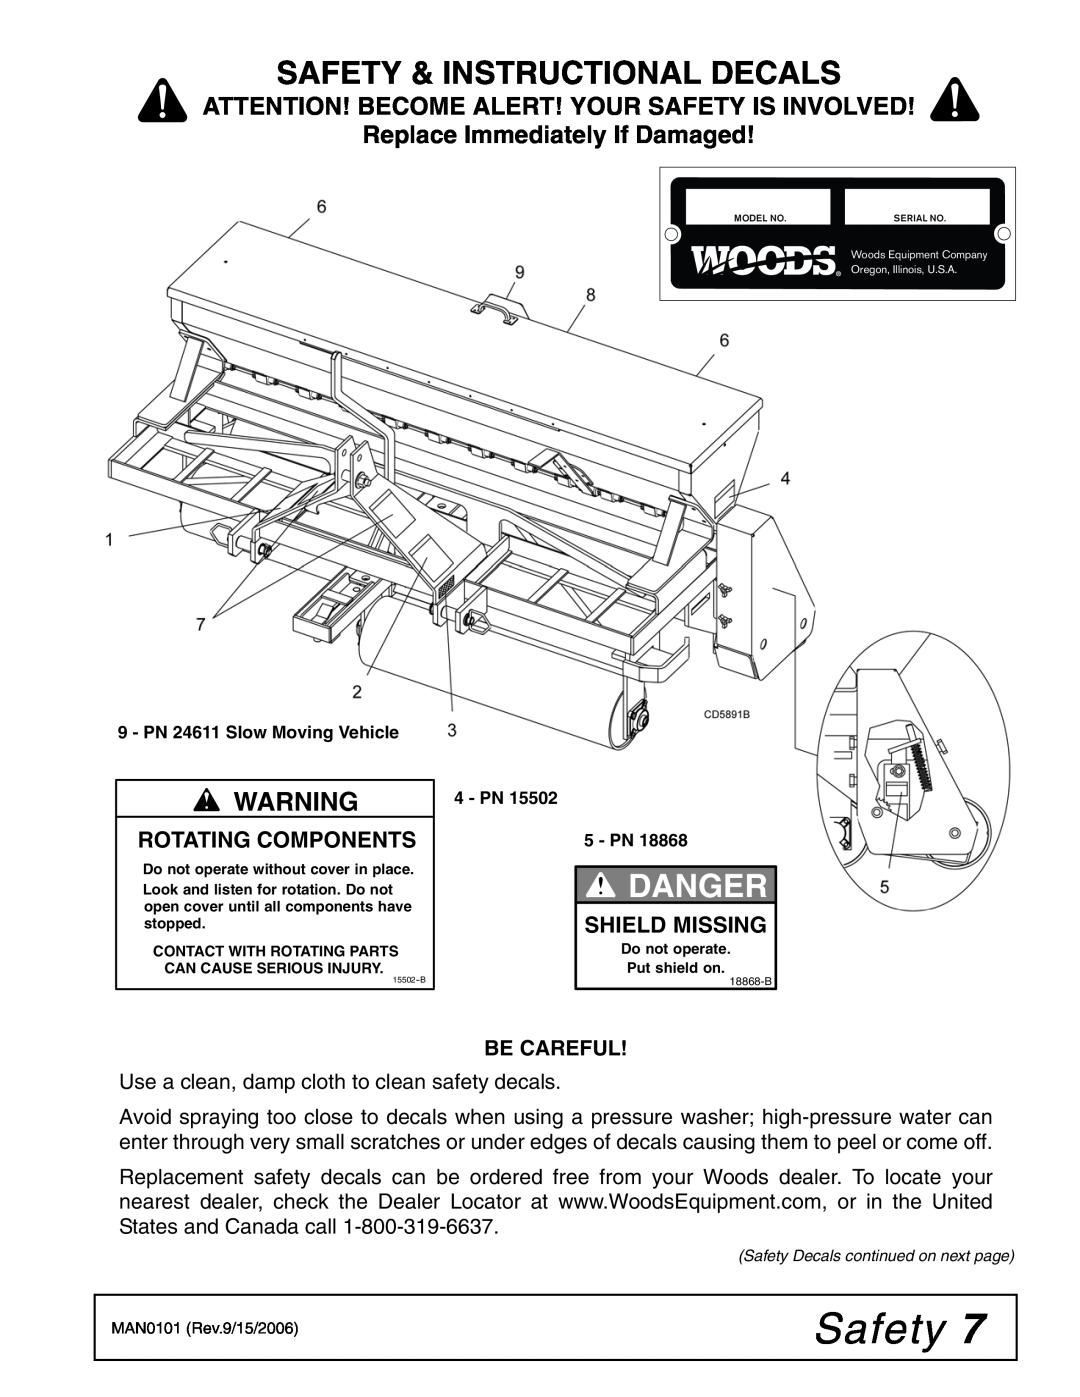 Woods Equipment STR72S-2 manual Safety & Instructional Decals, Replace Immediately If Damaged, Danger, Rotating Components 